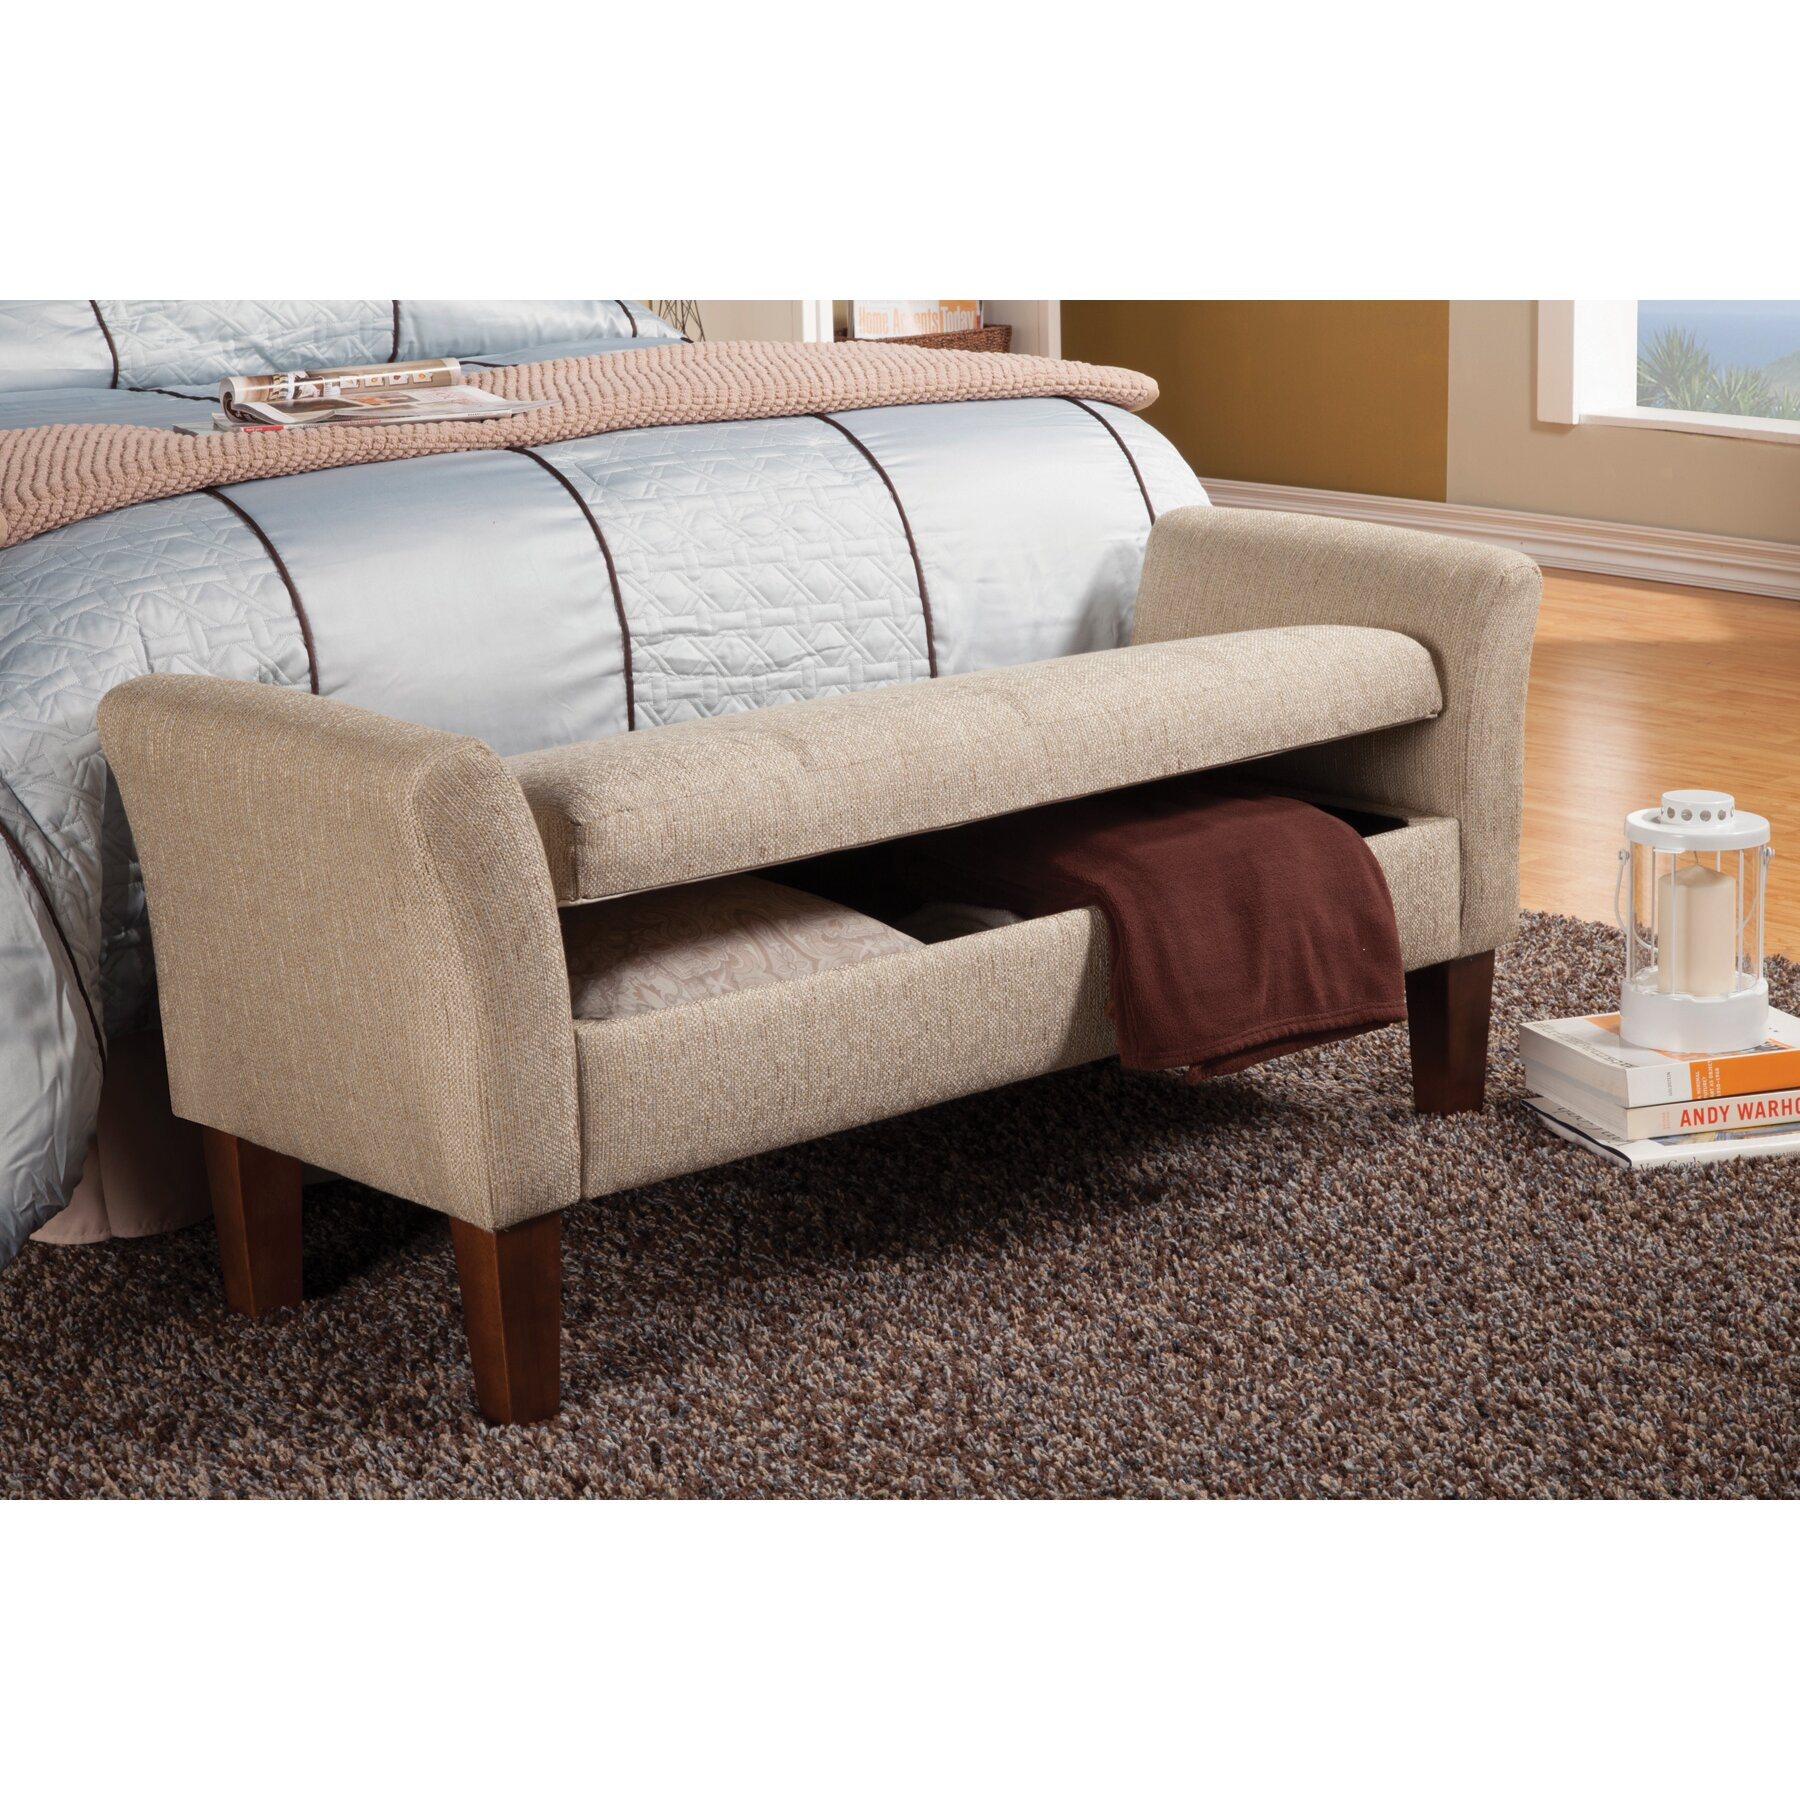 Large Storage Bench For Bedroom
 Wildon Home Upholstered Storage Bedroom Bench & Reviews